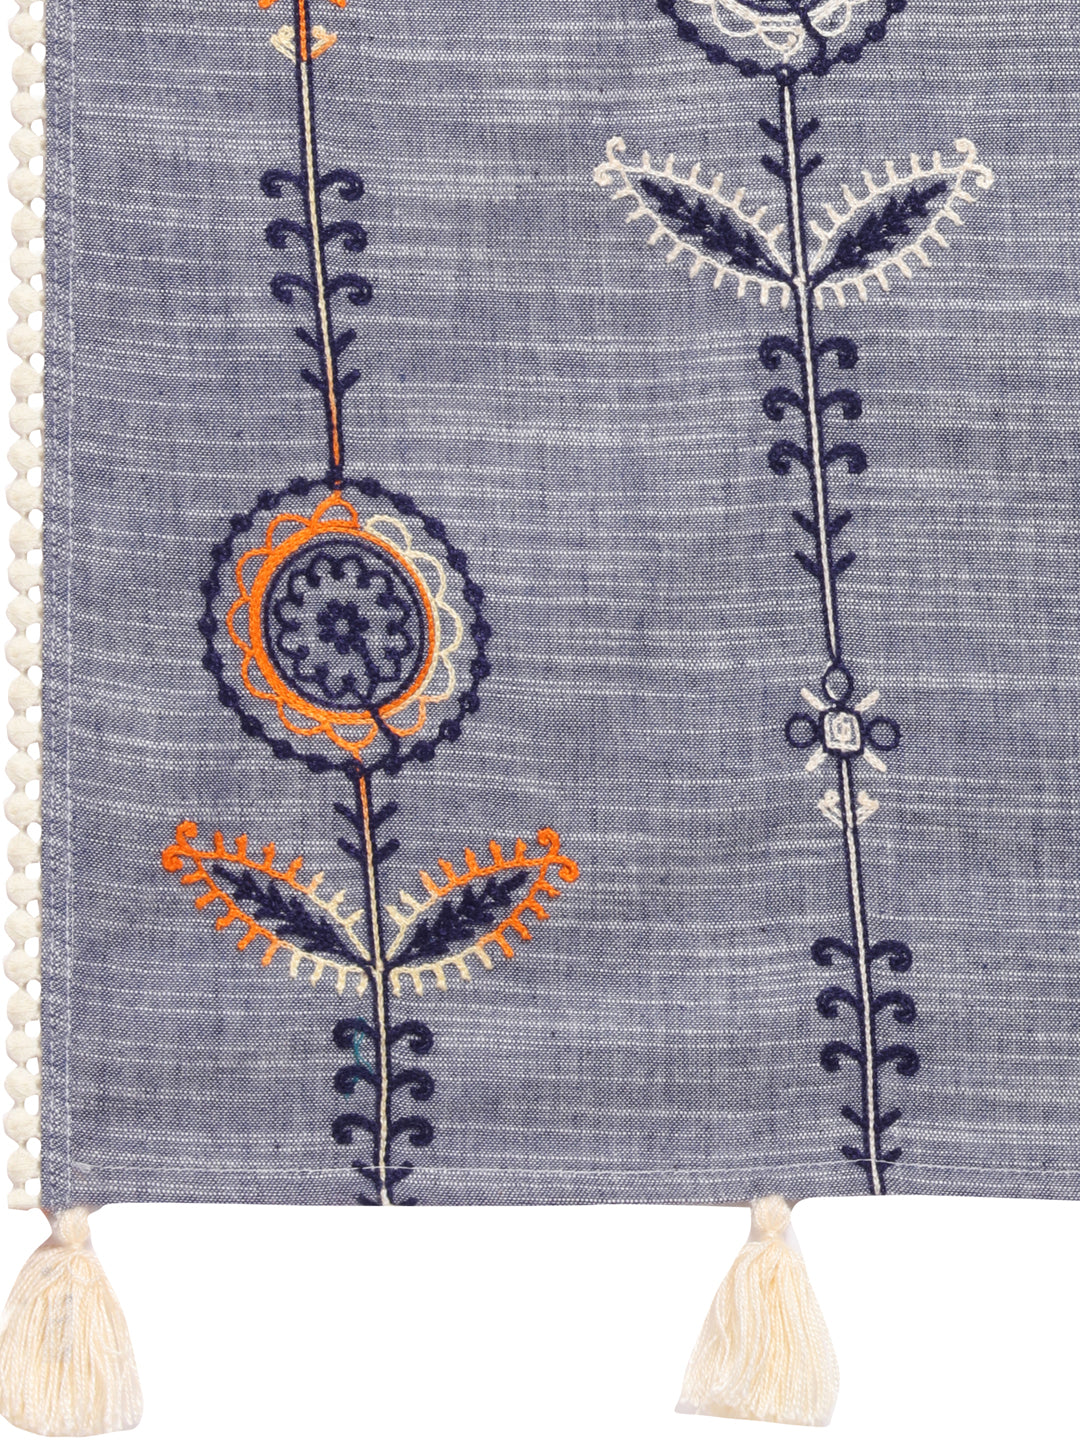 Women's   Charmed Cement Indigo Khadi Embrodiered Stole/Scarf - MESMORA FASHIONS